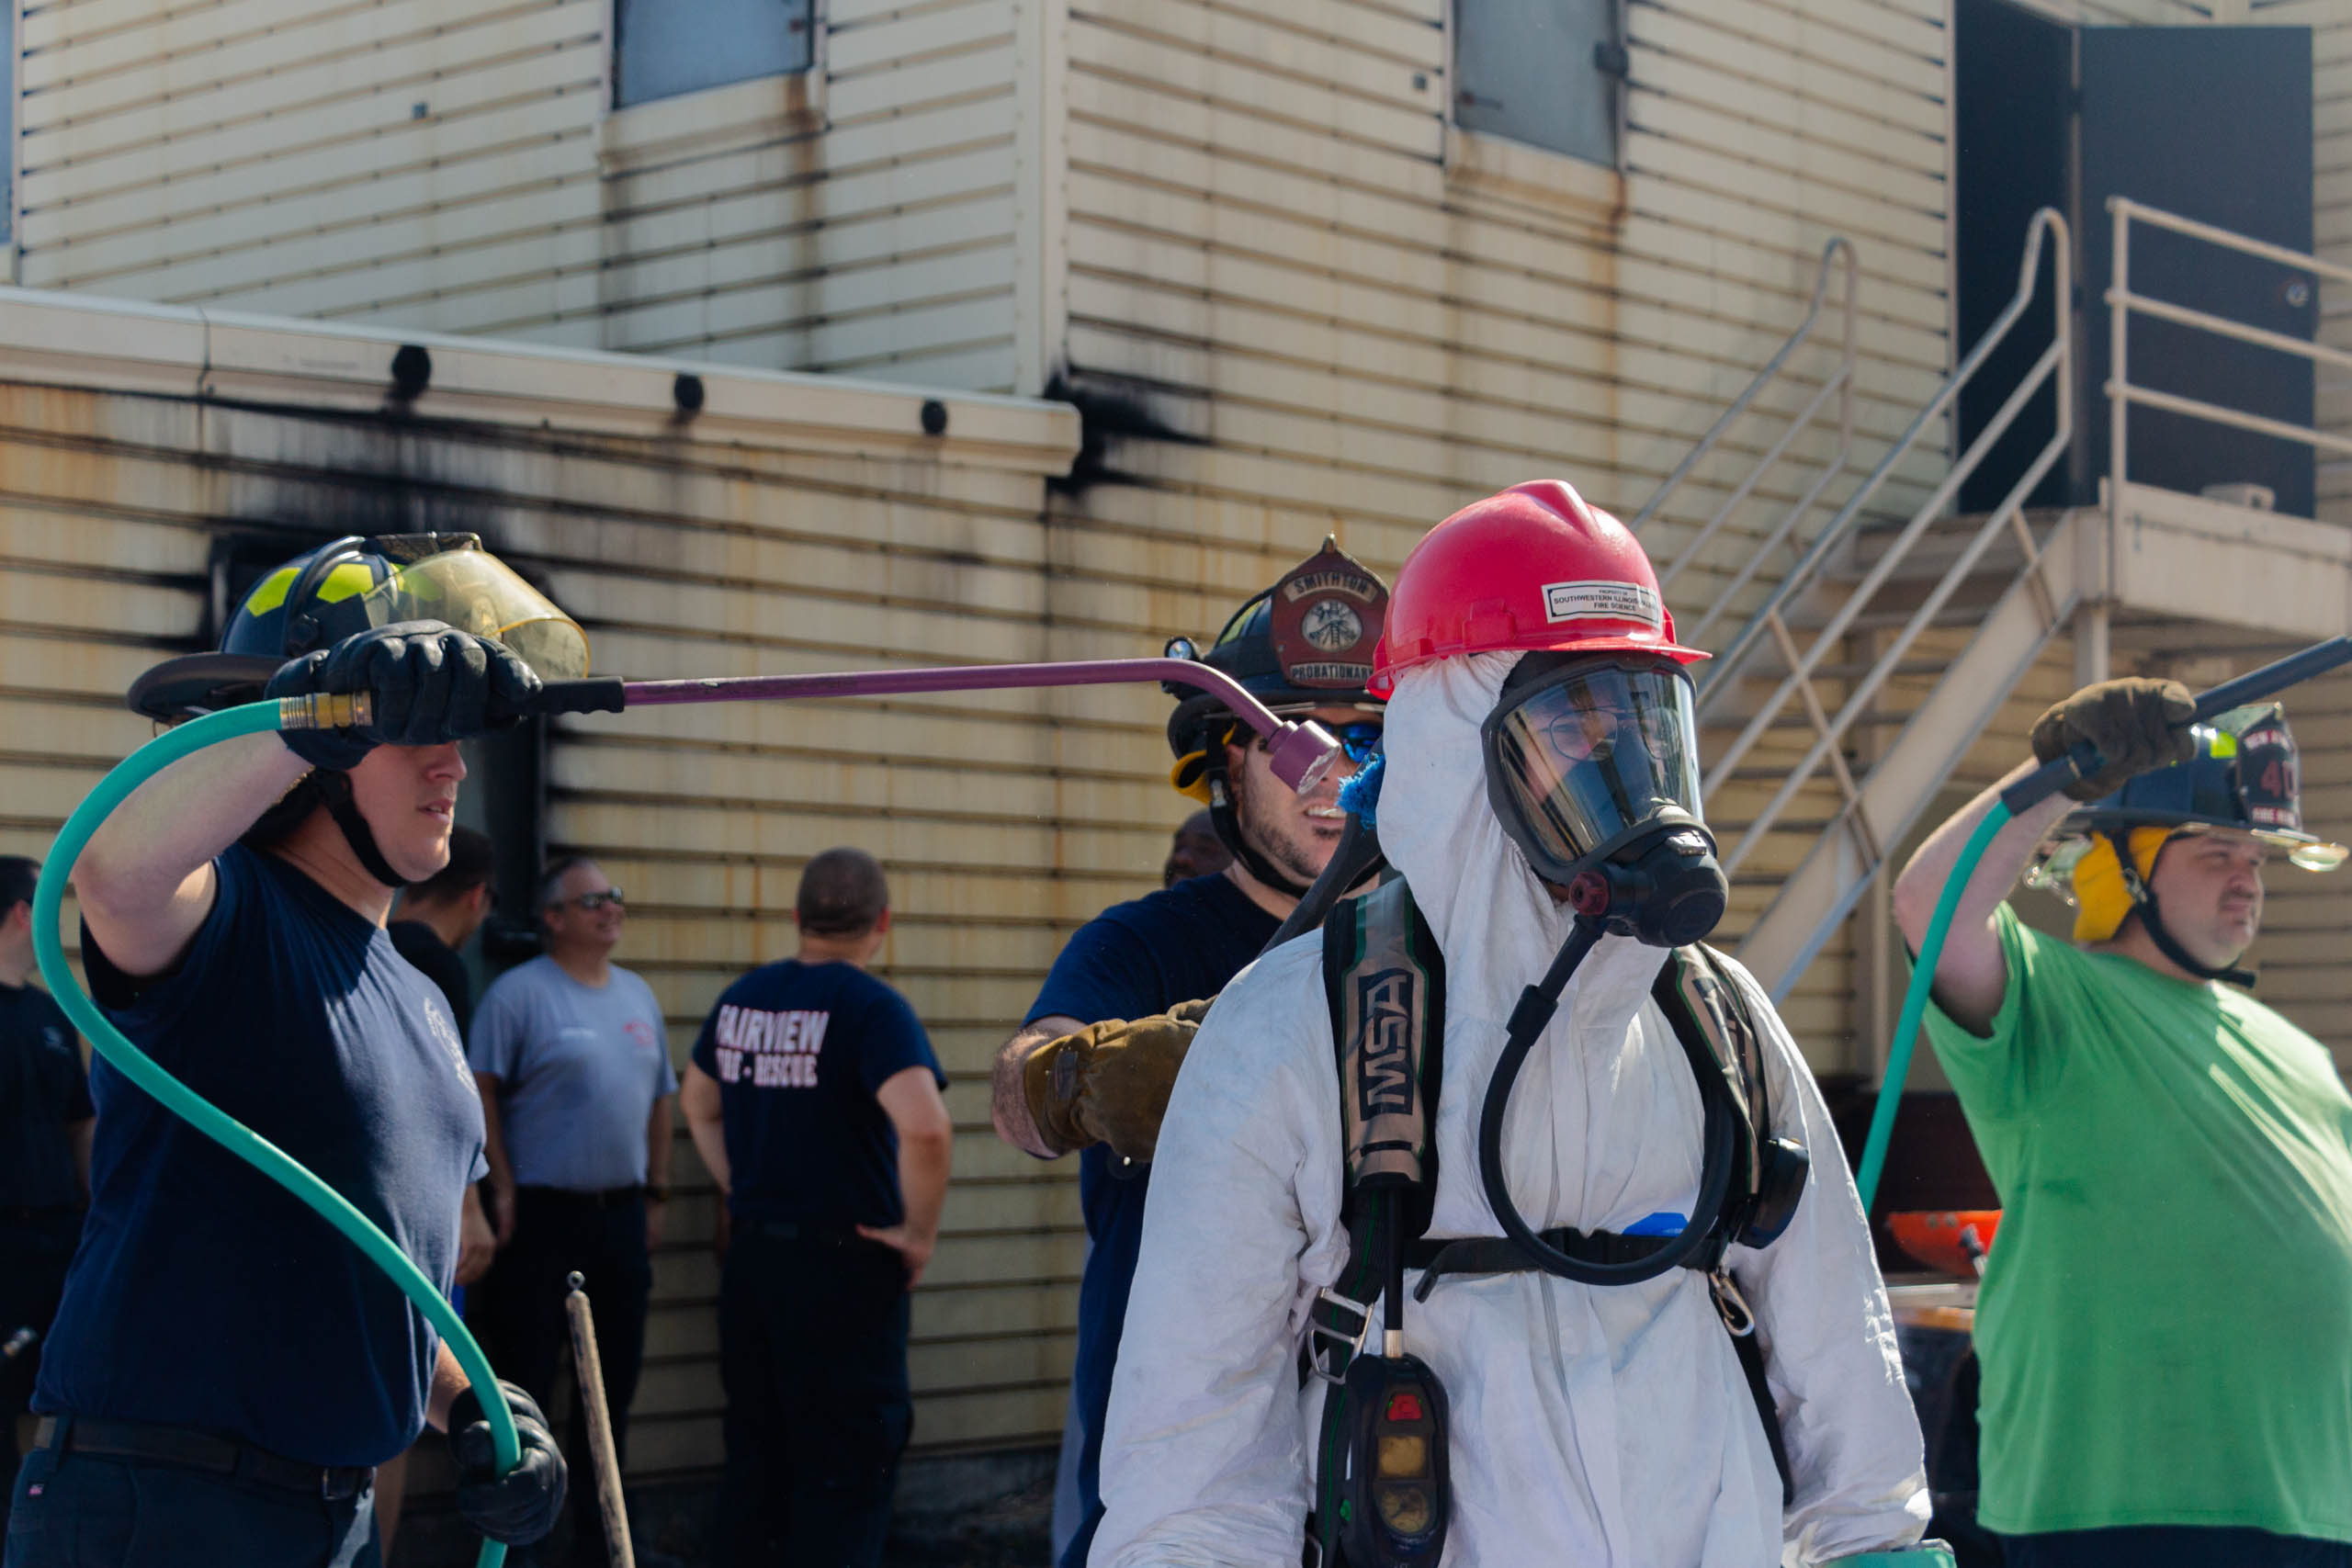 Fire Science Hazardous training person geared up having others teach different skills